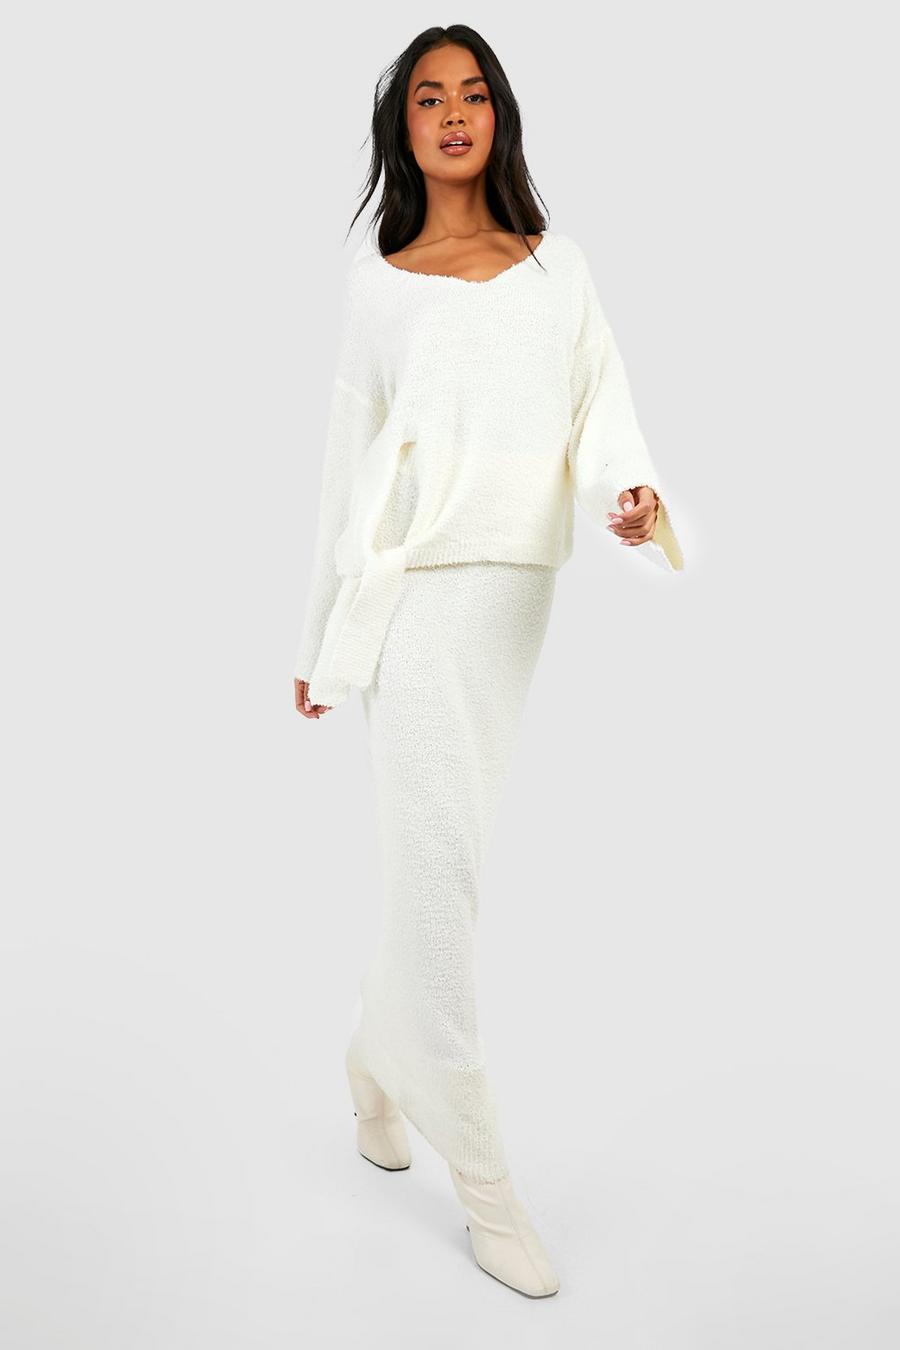 Ivory weiß Premum Textured Slouchy Knit Jumper And Maxi Skirt Co-ord